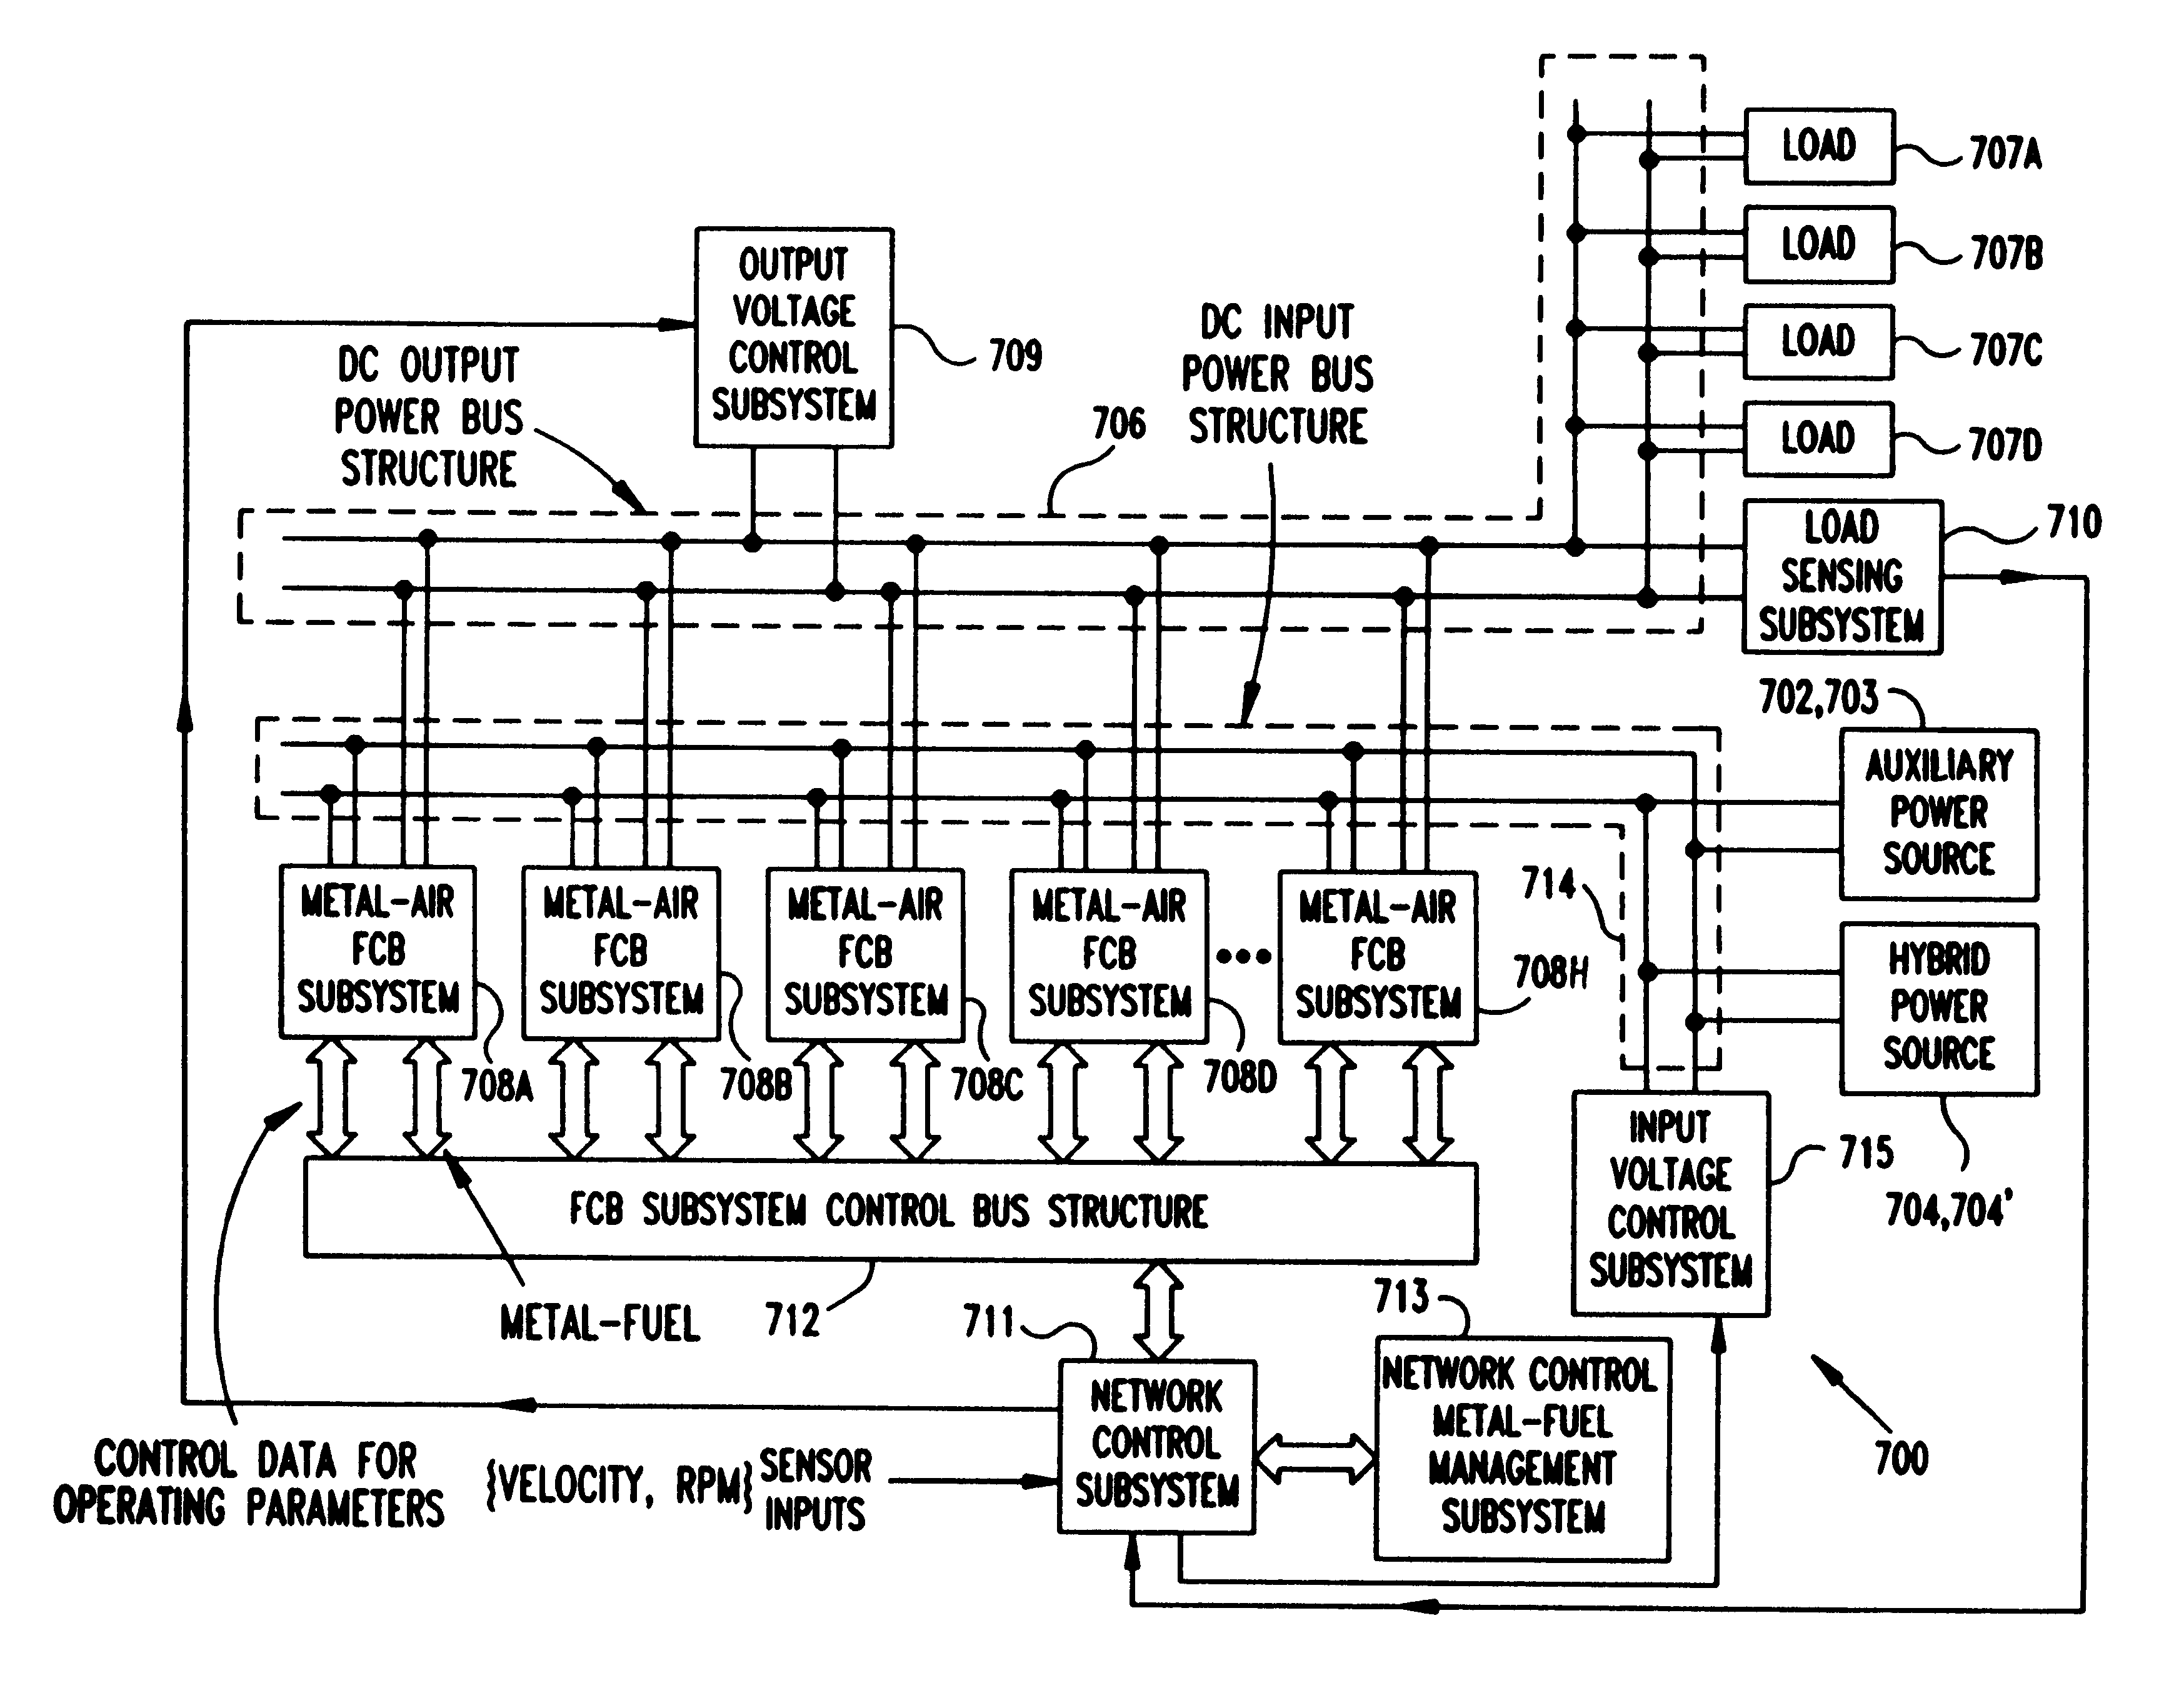 Electrical power generation system having means for managing the discharging and recharging of metal fuel contained within a network of metal-air fuel cell battery subsystems